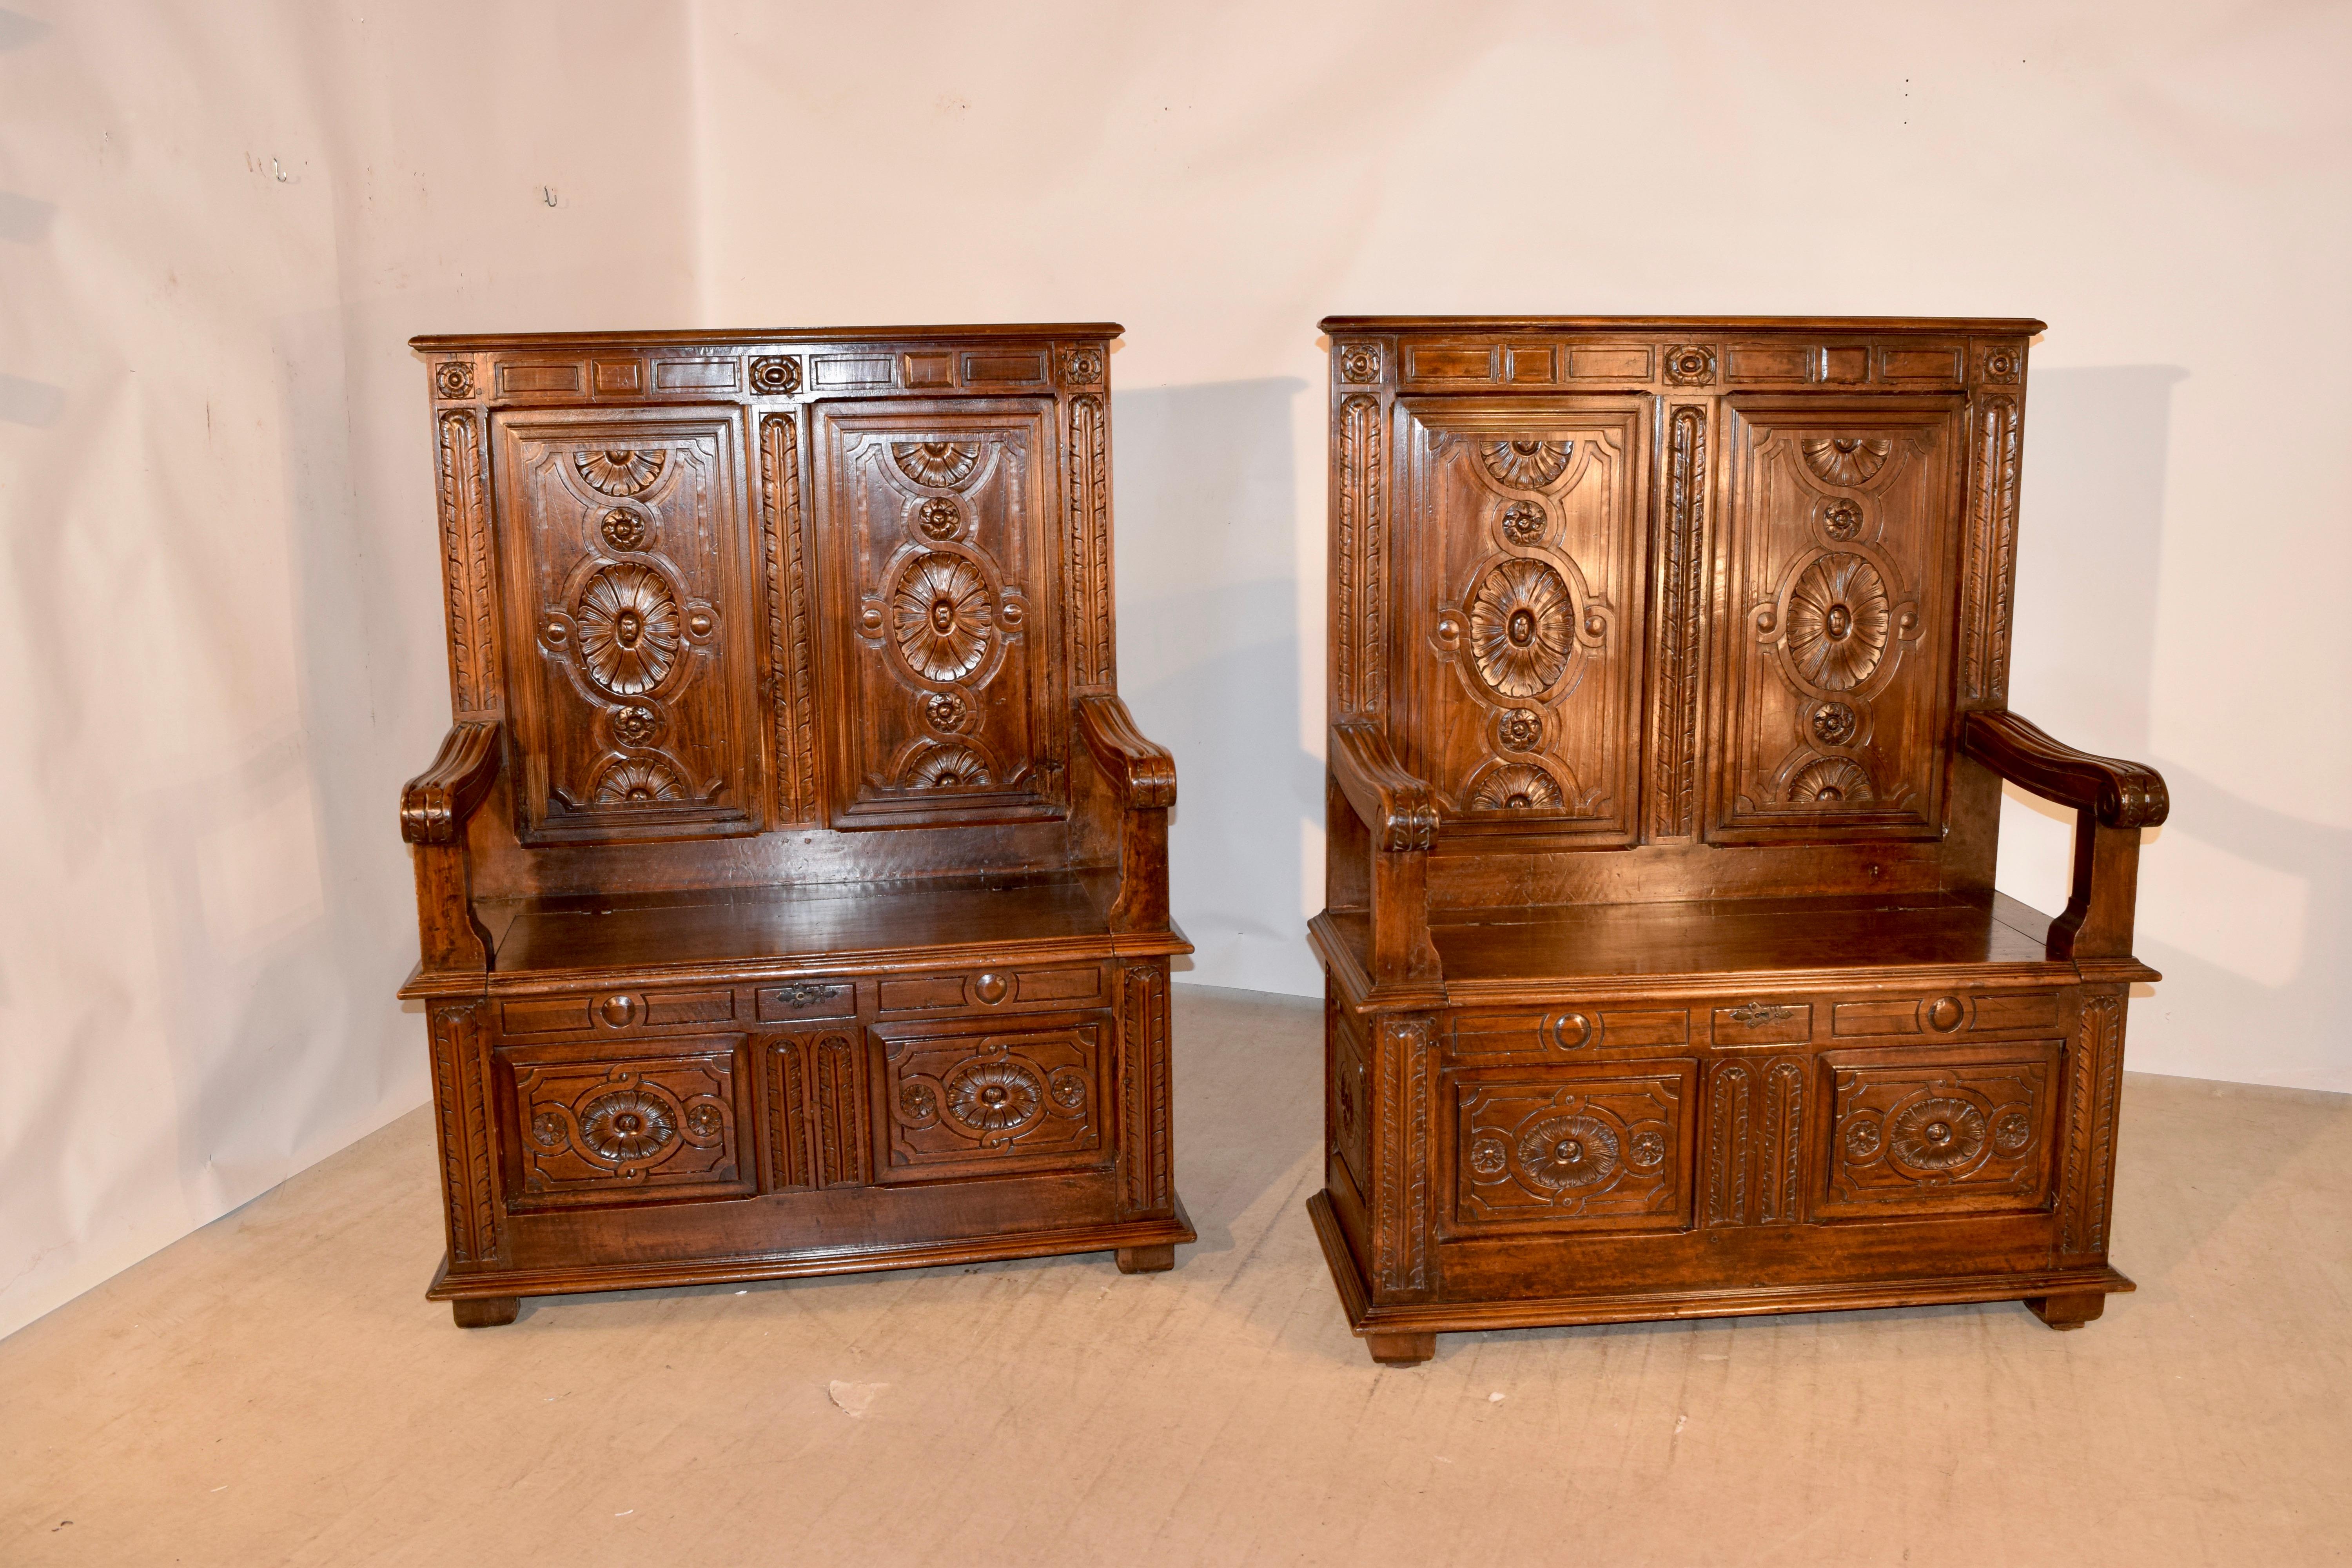 Pair of 19th century oak hall benches from England with lovely hand paneled backs which are hand carved decorated as well. The seats lift to reveal storage compartments. The base of the benches have hand carved raised panels on three sides, and are